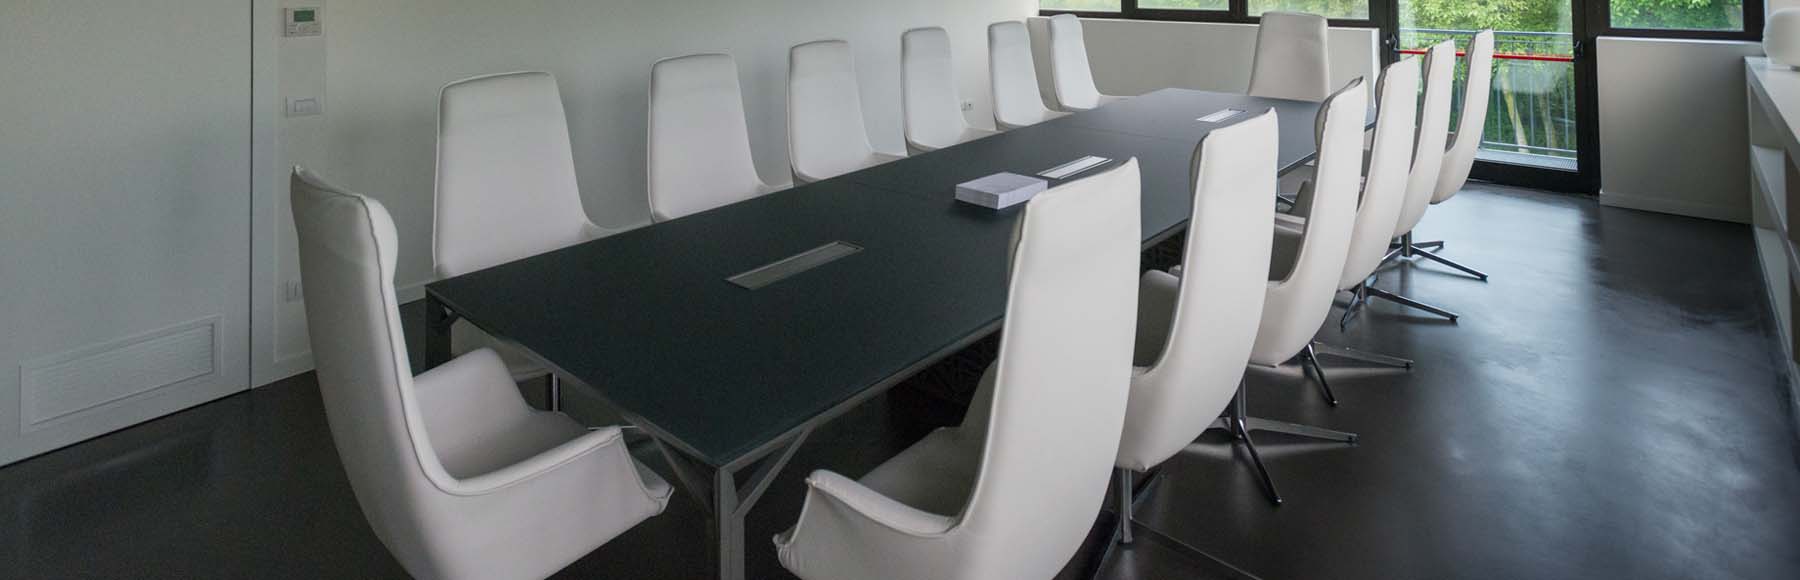 Meeting Room Tables